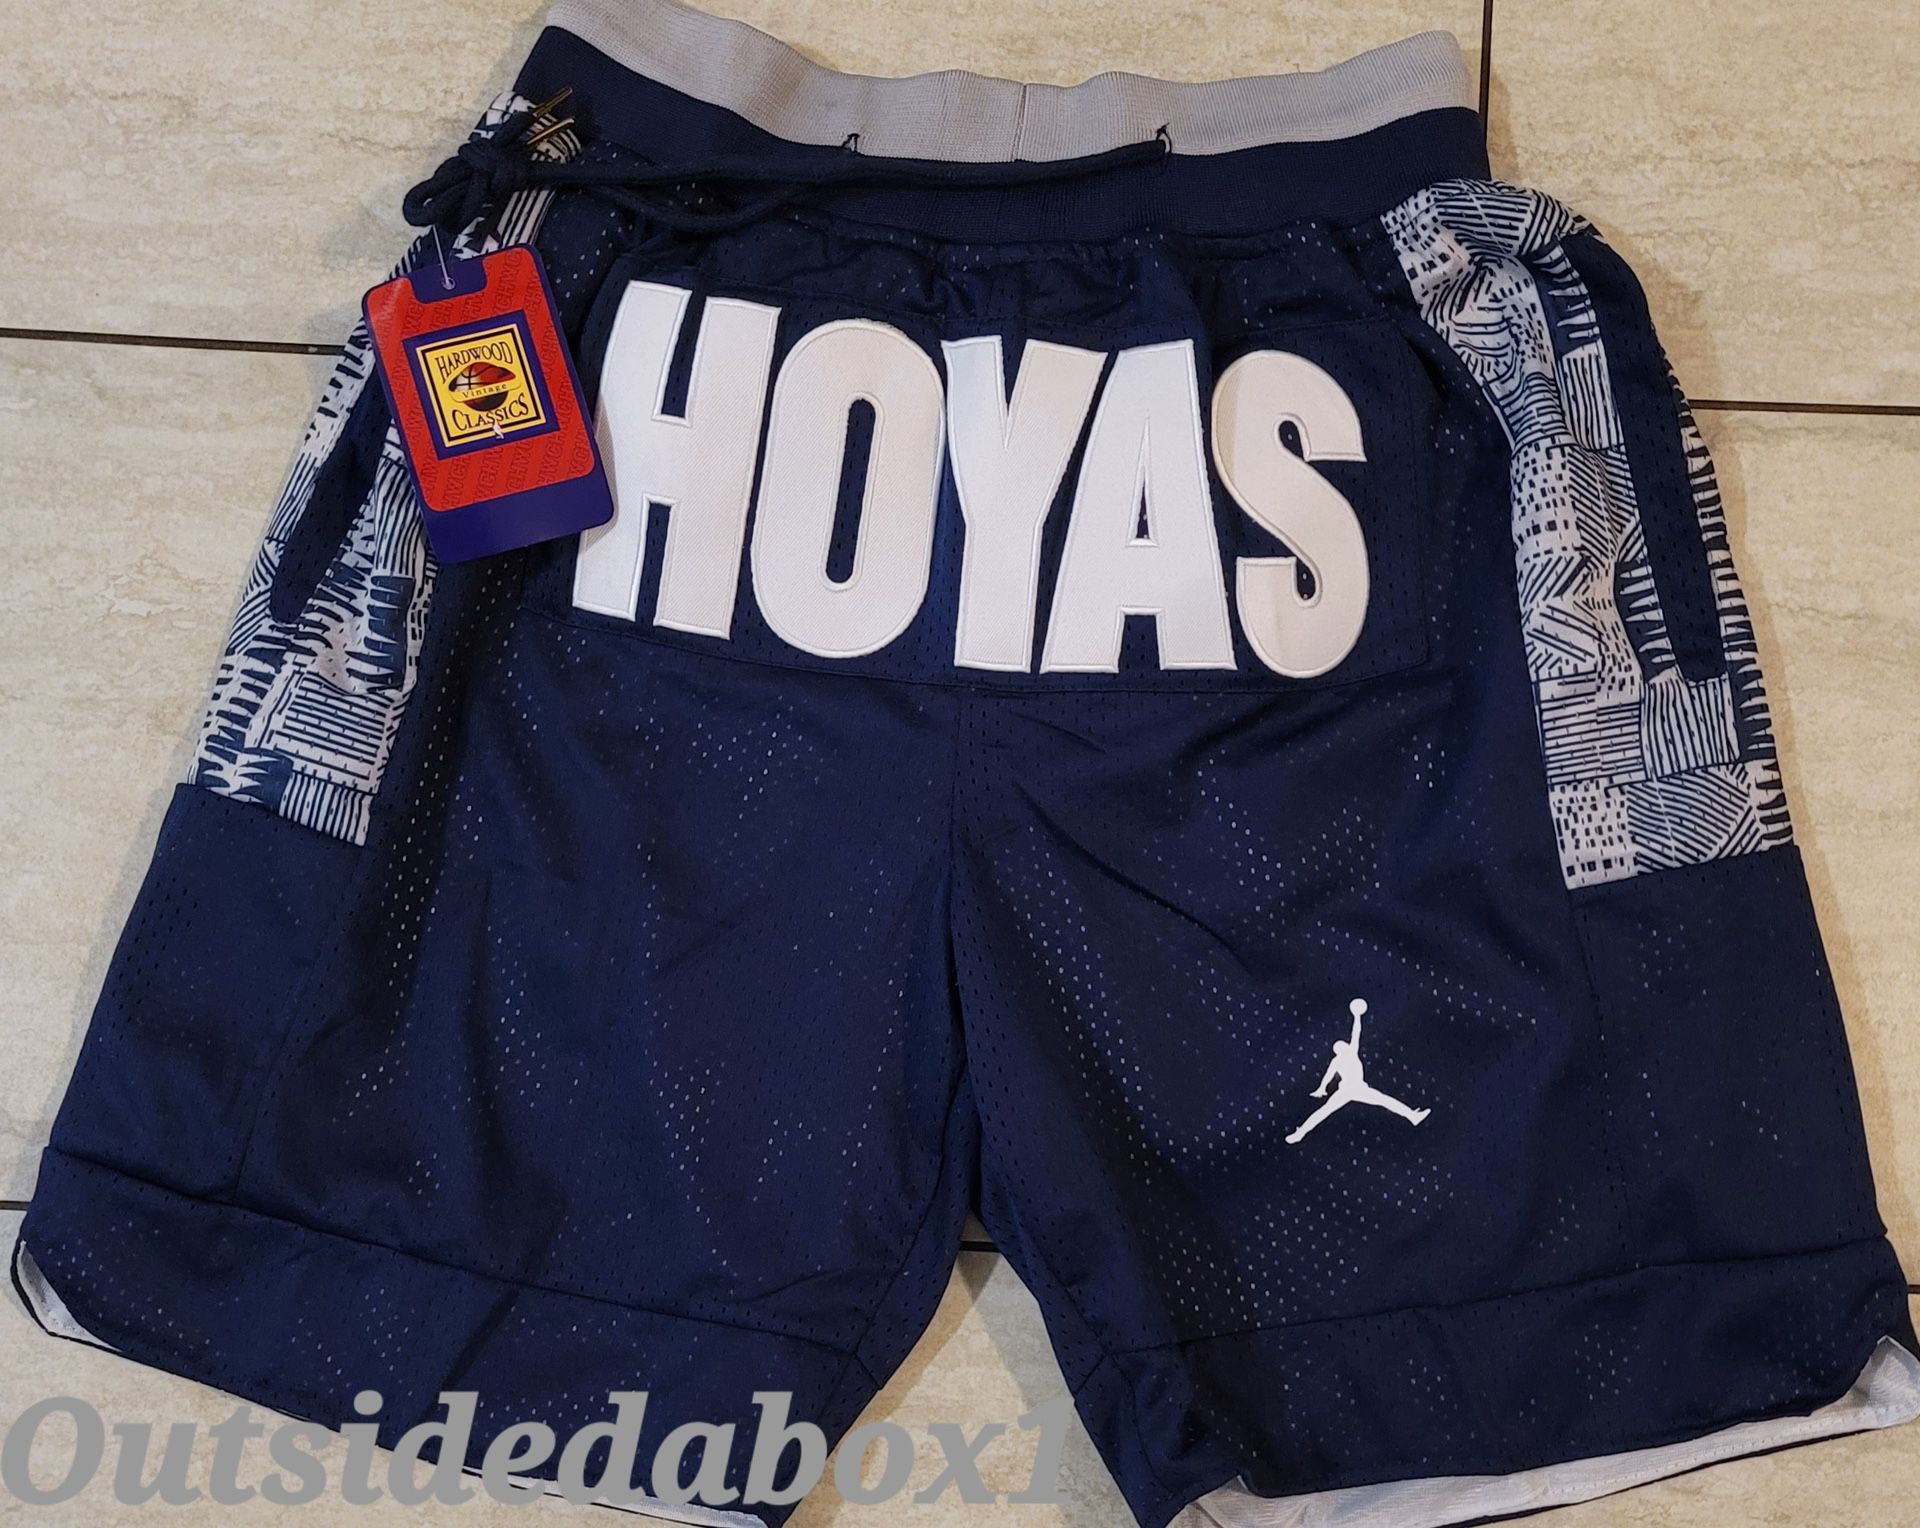 Georgetown Hoyas Basketball 🏀  Shorts Men's Sizes  Available  Shipping Available 📬 New!!